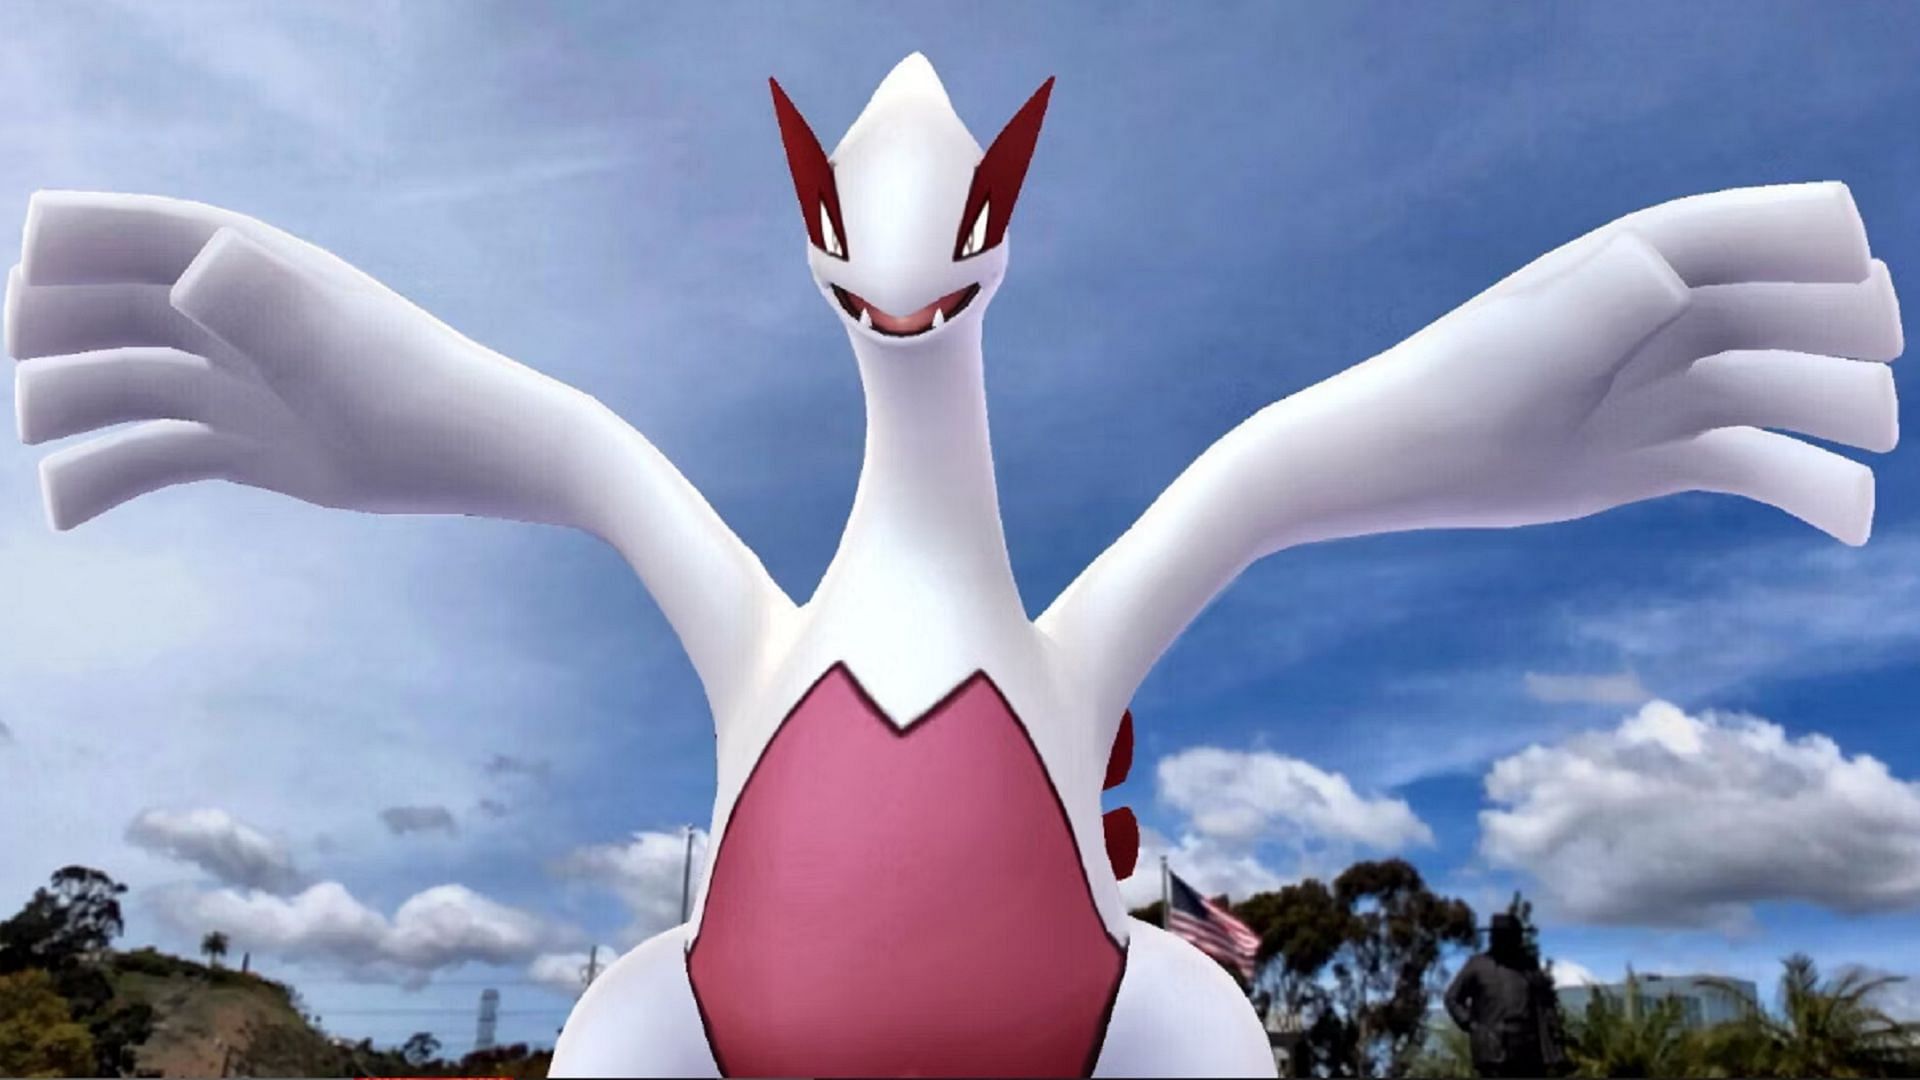 Shiny Lugia as it appears in Pokemon GO, with a pink body coloration compared to its ordinary dark blue.